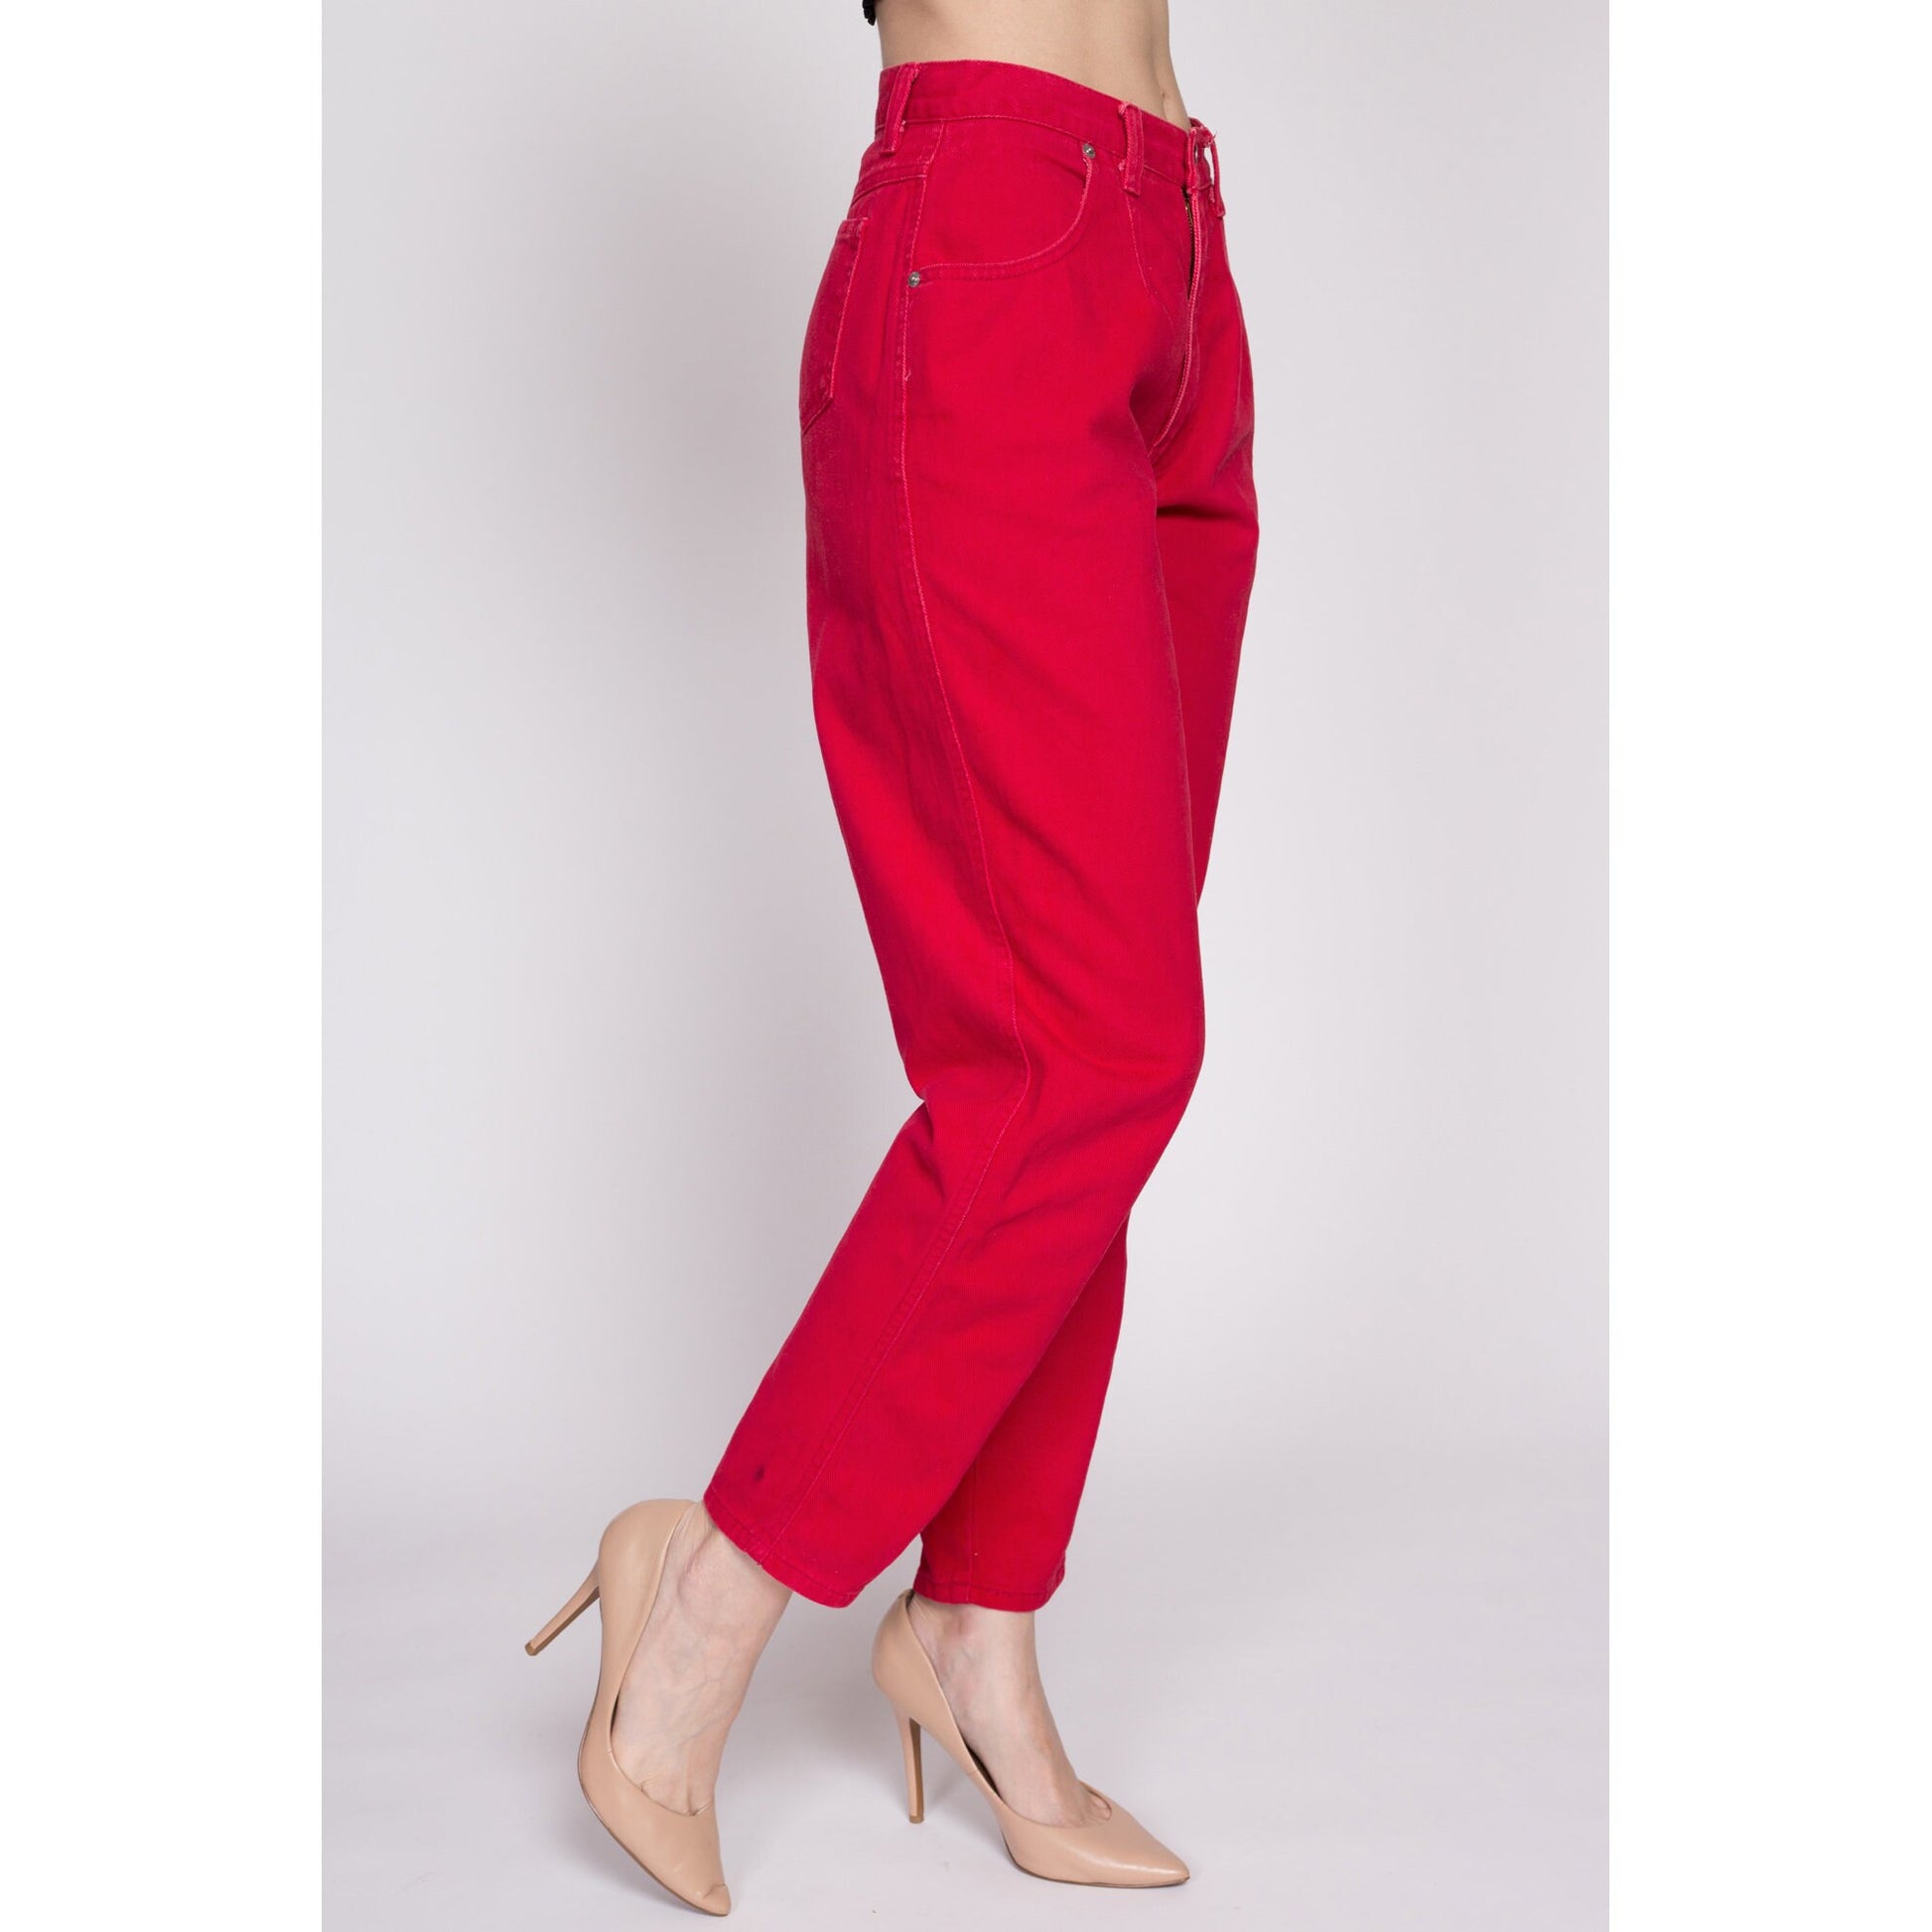 S| 90s Sassoon Red High Waisted Jeans - Small, 26" | Vintage Soft Denim Pleated Tapered Leg Mom Jeans